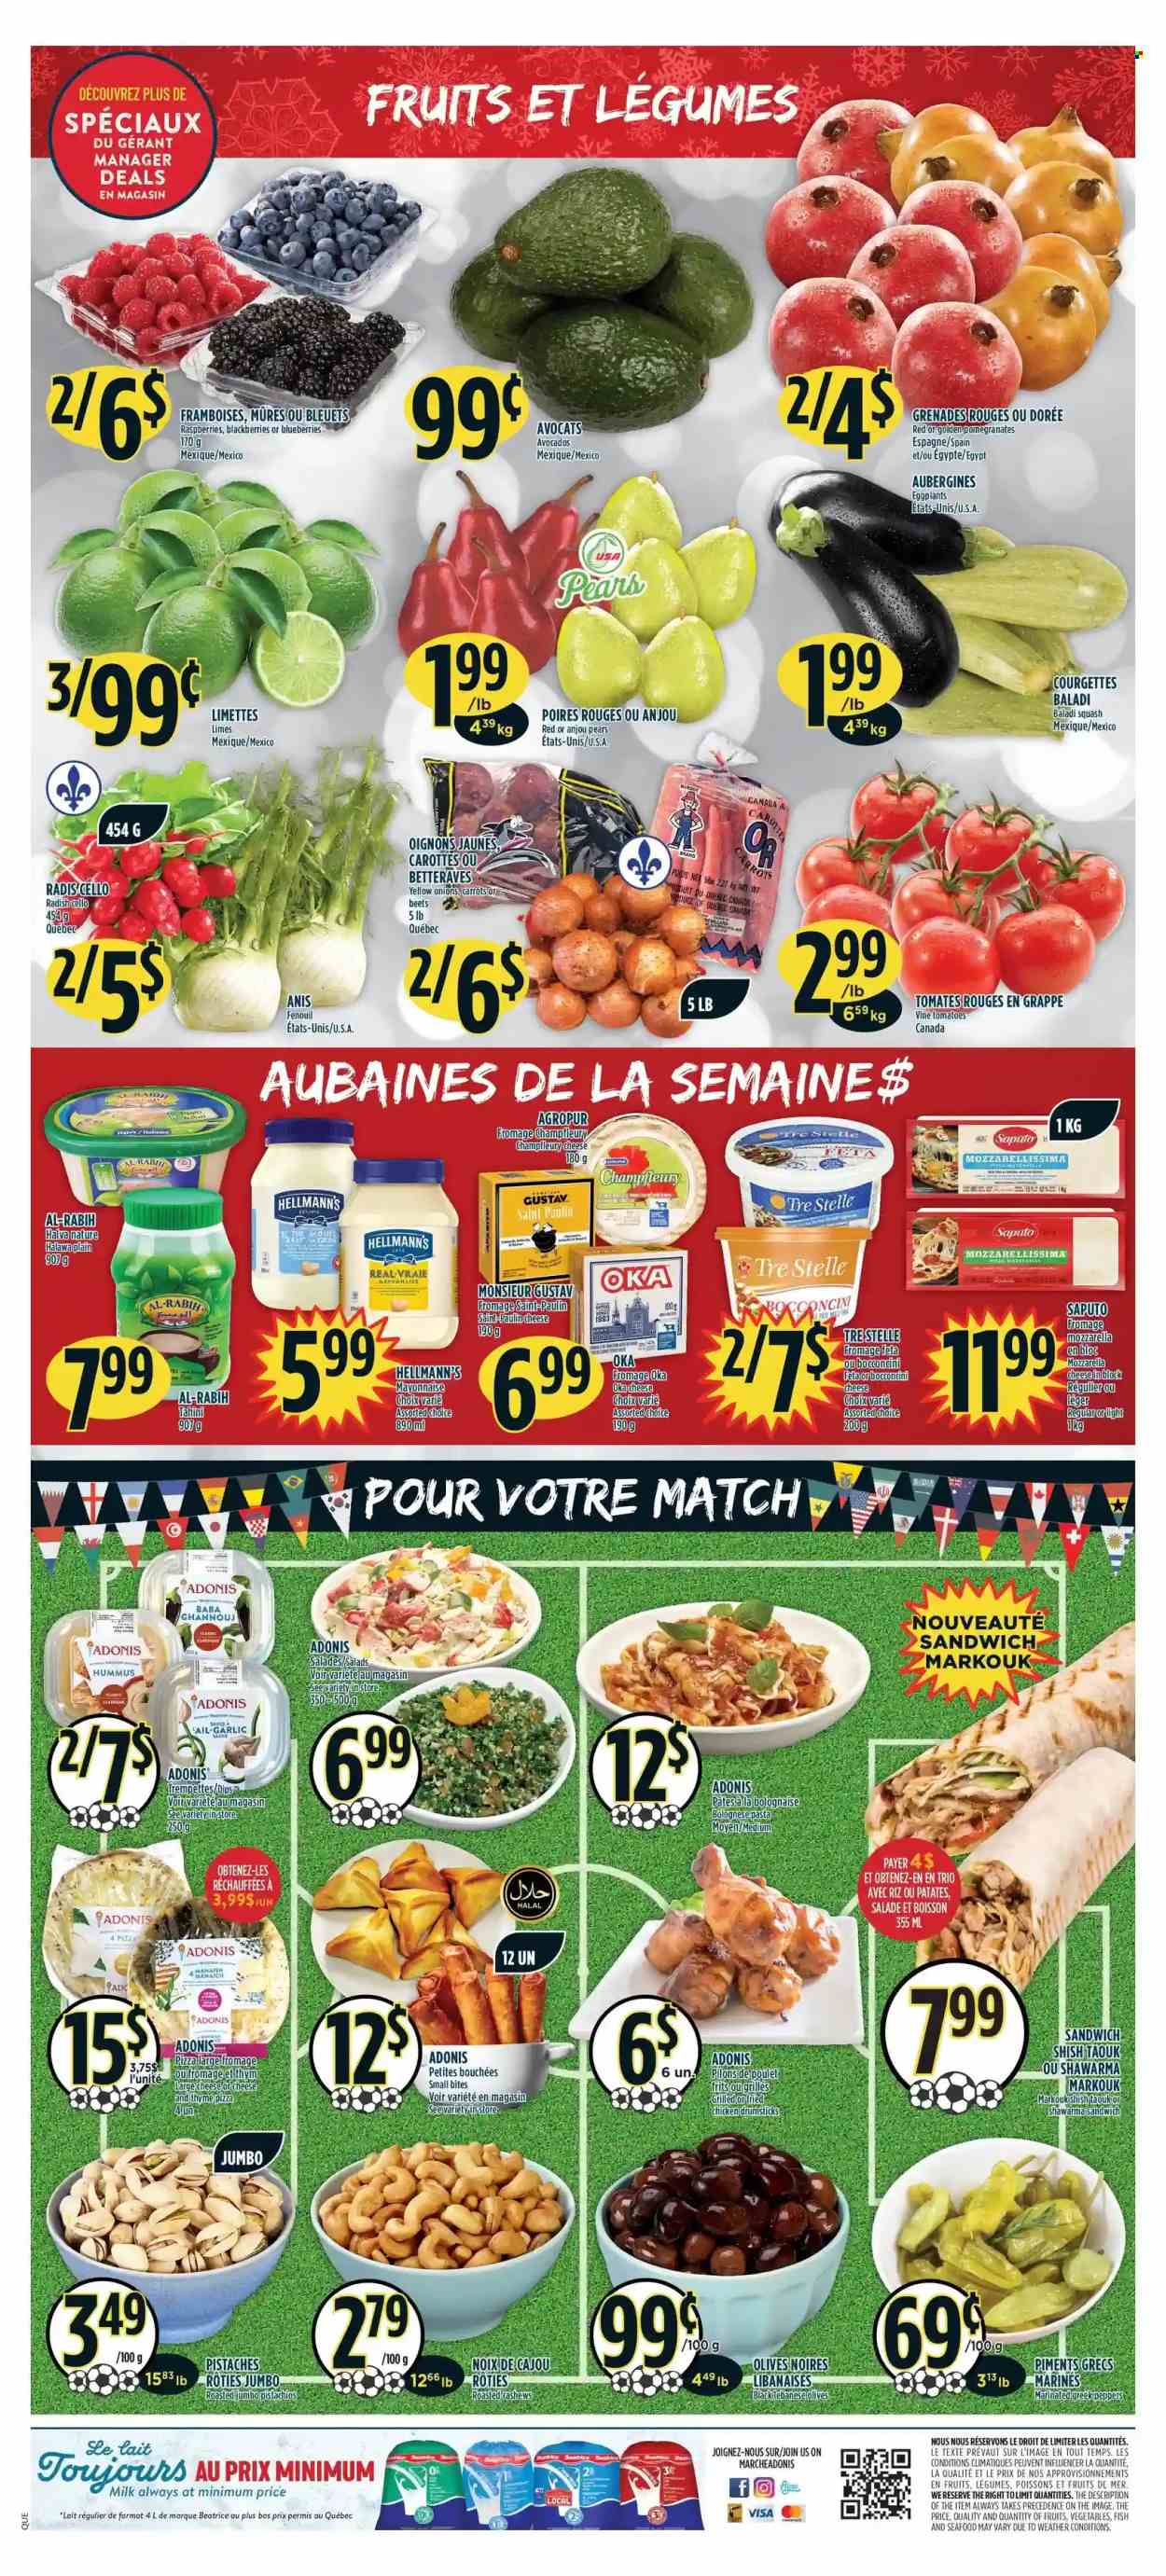 thumbnail - Adonis Flyer - November 24, 2022 - November 30, 2022 - Sales products - carrots, garlic, radishes, peppers, eggplant, avocado, blackberries, blueberries, limes, pears, pomegranate, seafood, pizza, sandwich, pasta, sauce, fried chicken, hummus, bocconcini, feta, milk, mayonnaise, Hellmann’s, rice, tahini, cashews, pistachios, chicken, brace, olives. Page 2.